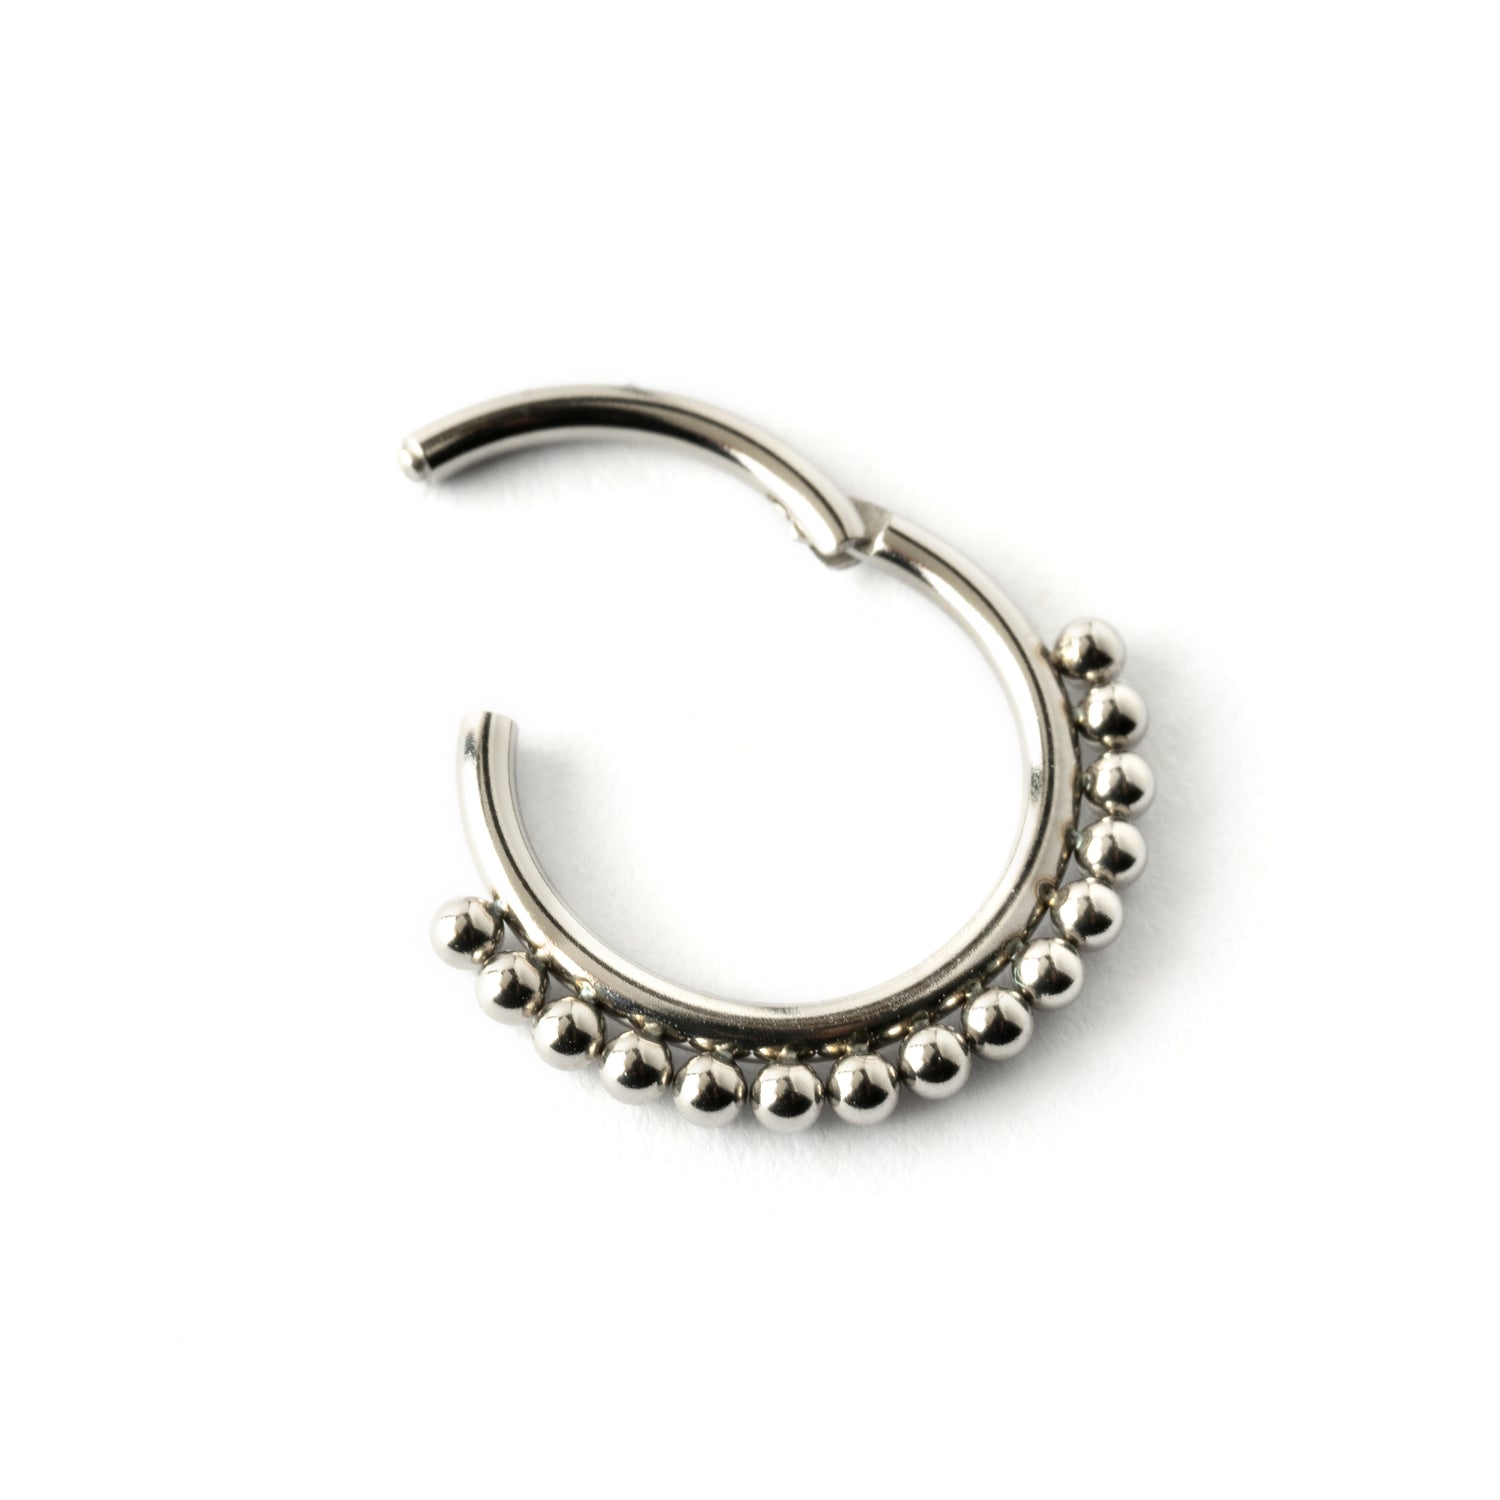 Liya surgical steel septum clicker ring right side closure view